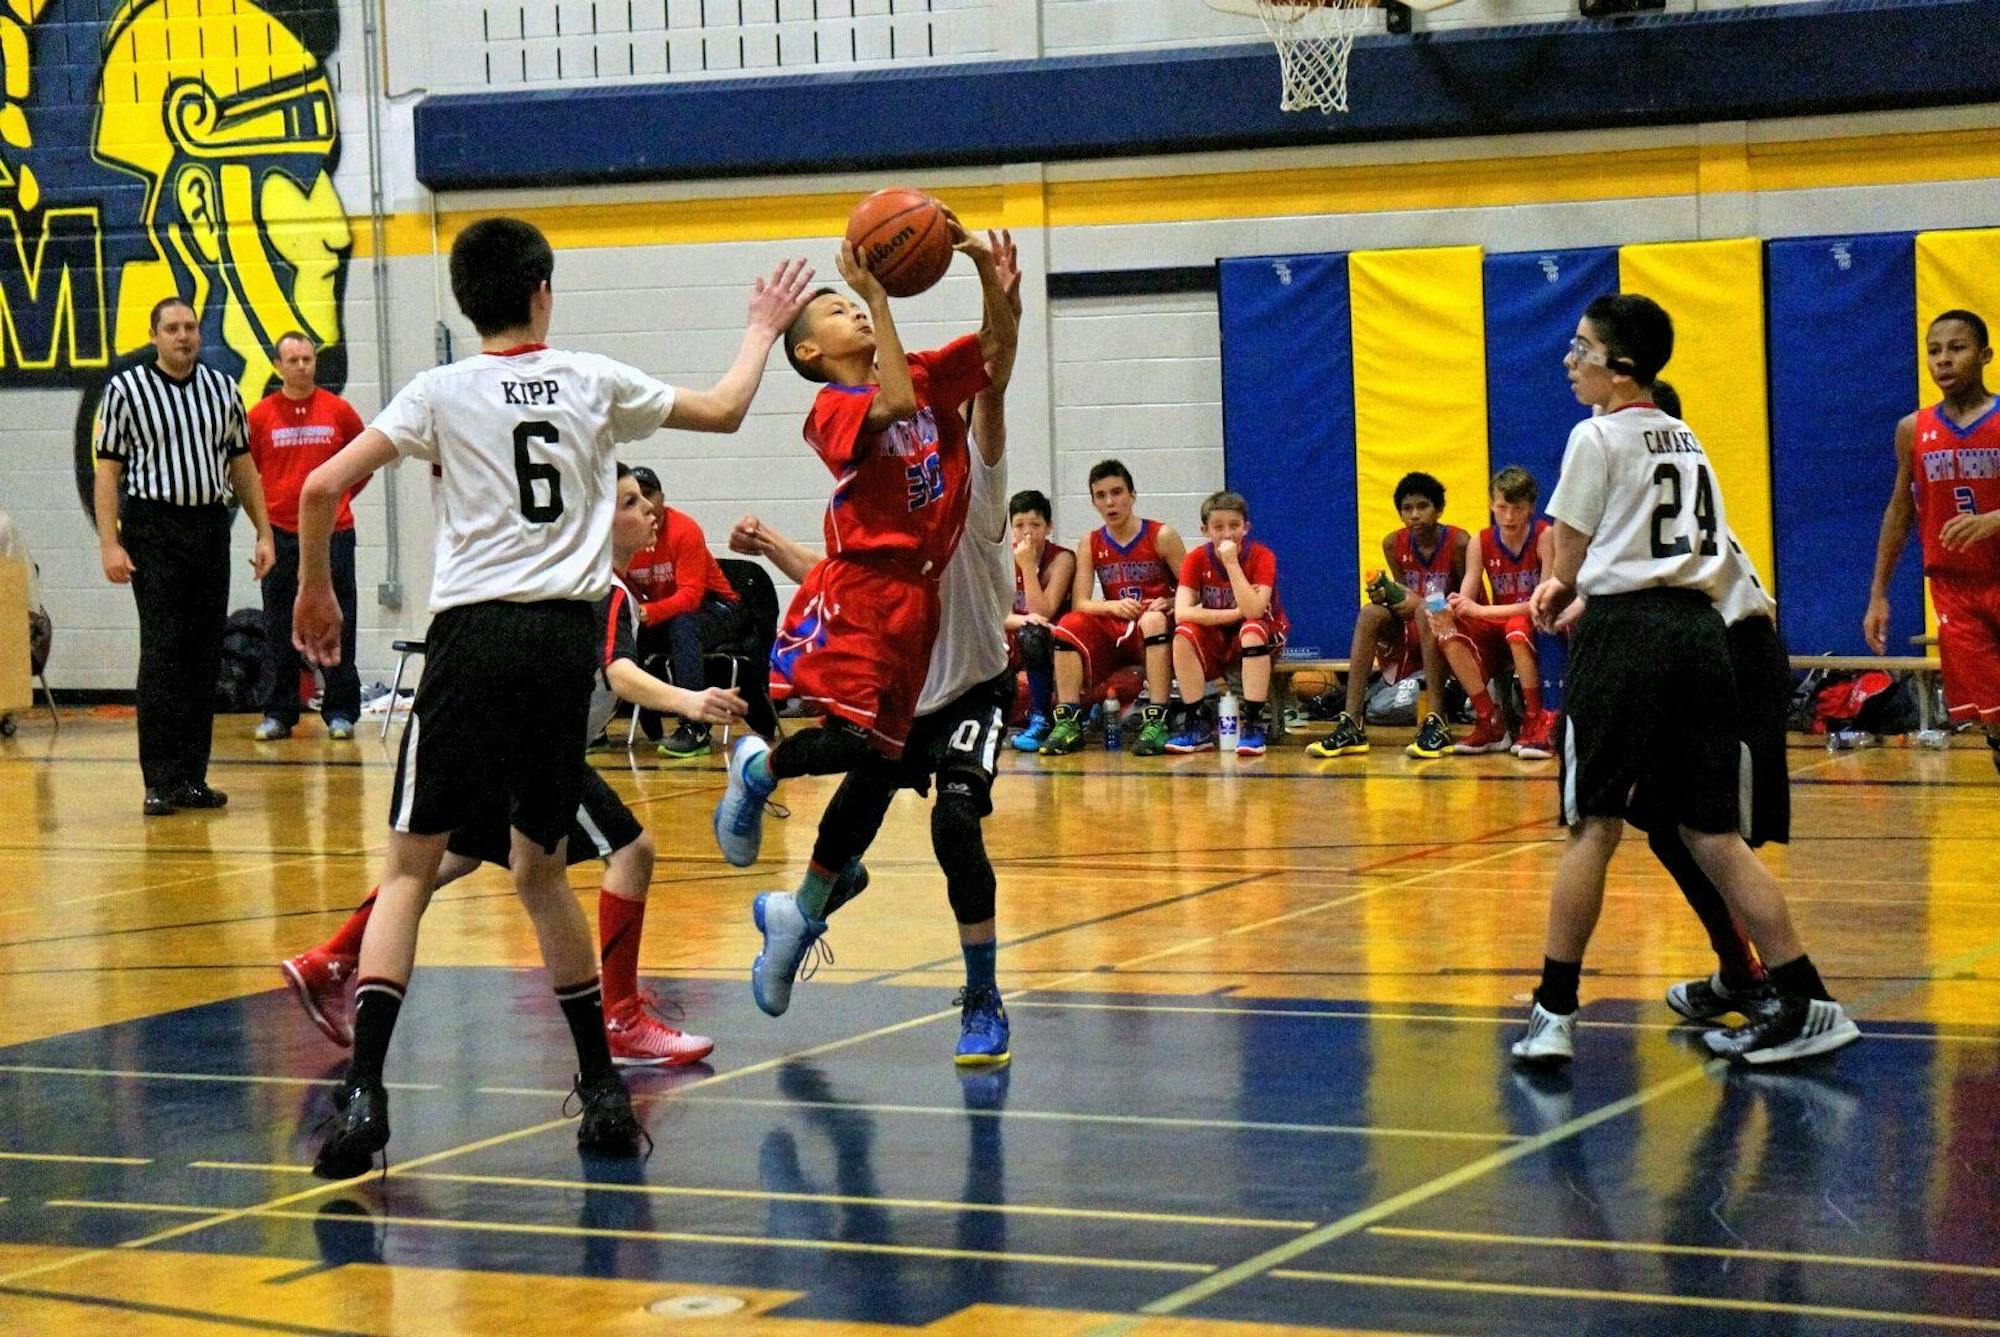 A boy in a red jersey that reads "NORTH TORONTO" and red shorts launches an orange basketball towards a basket. A player in a white jersey, numbered six, tries to block him.